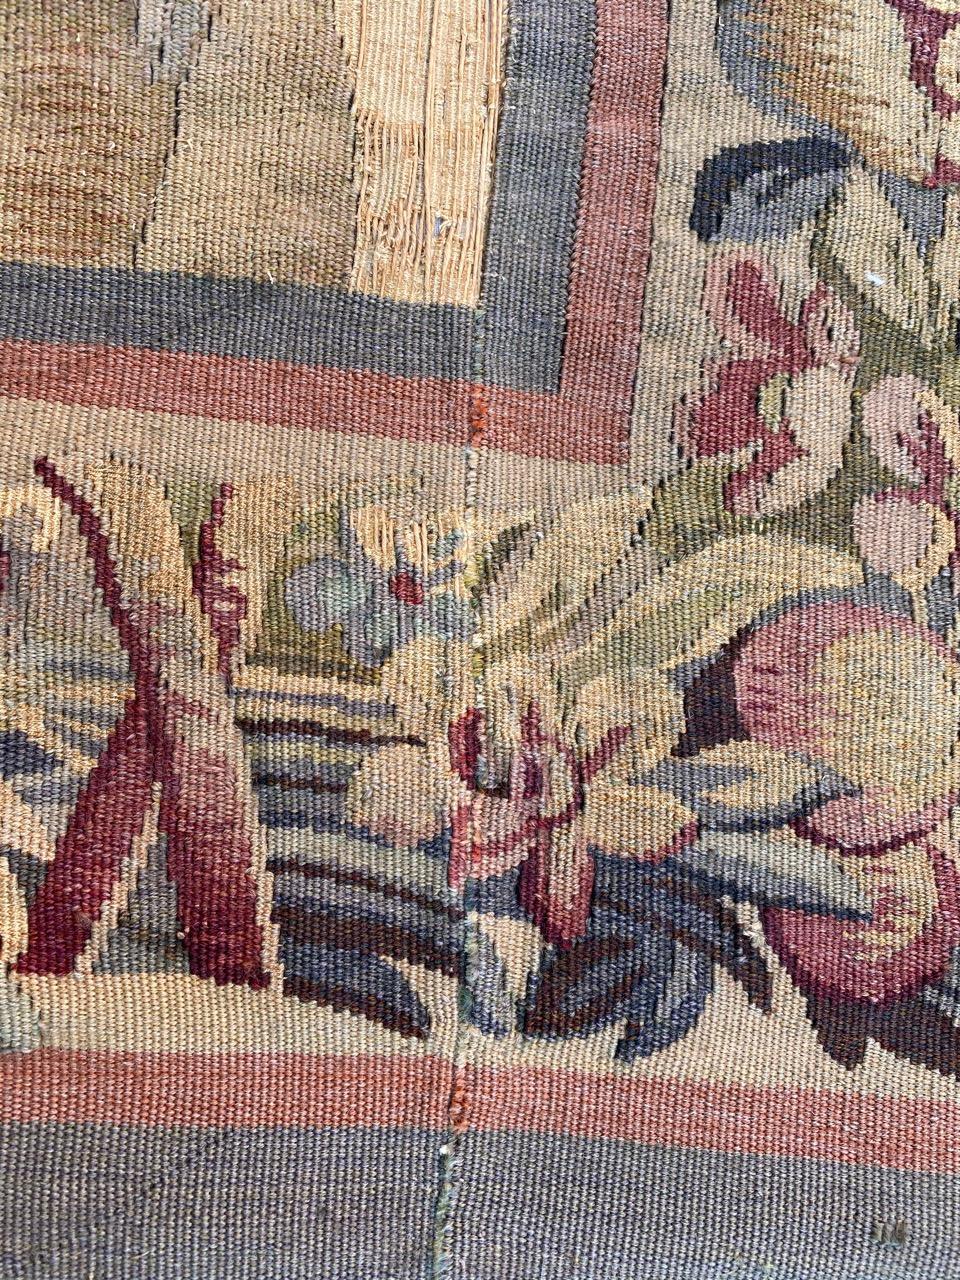 Wonderful Antique French Aubusson Tapestry Maximilian Design 12